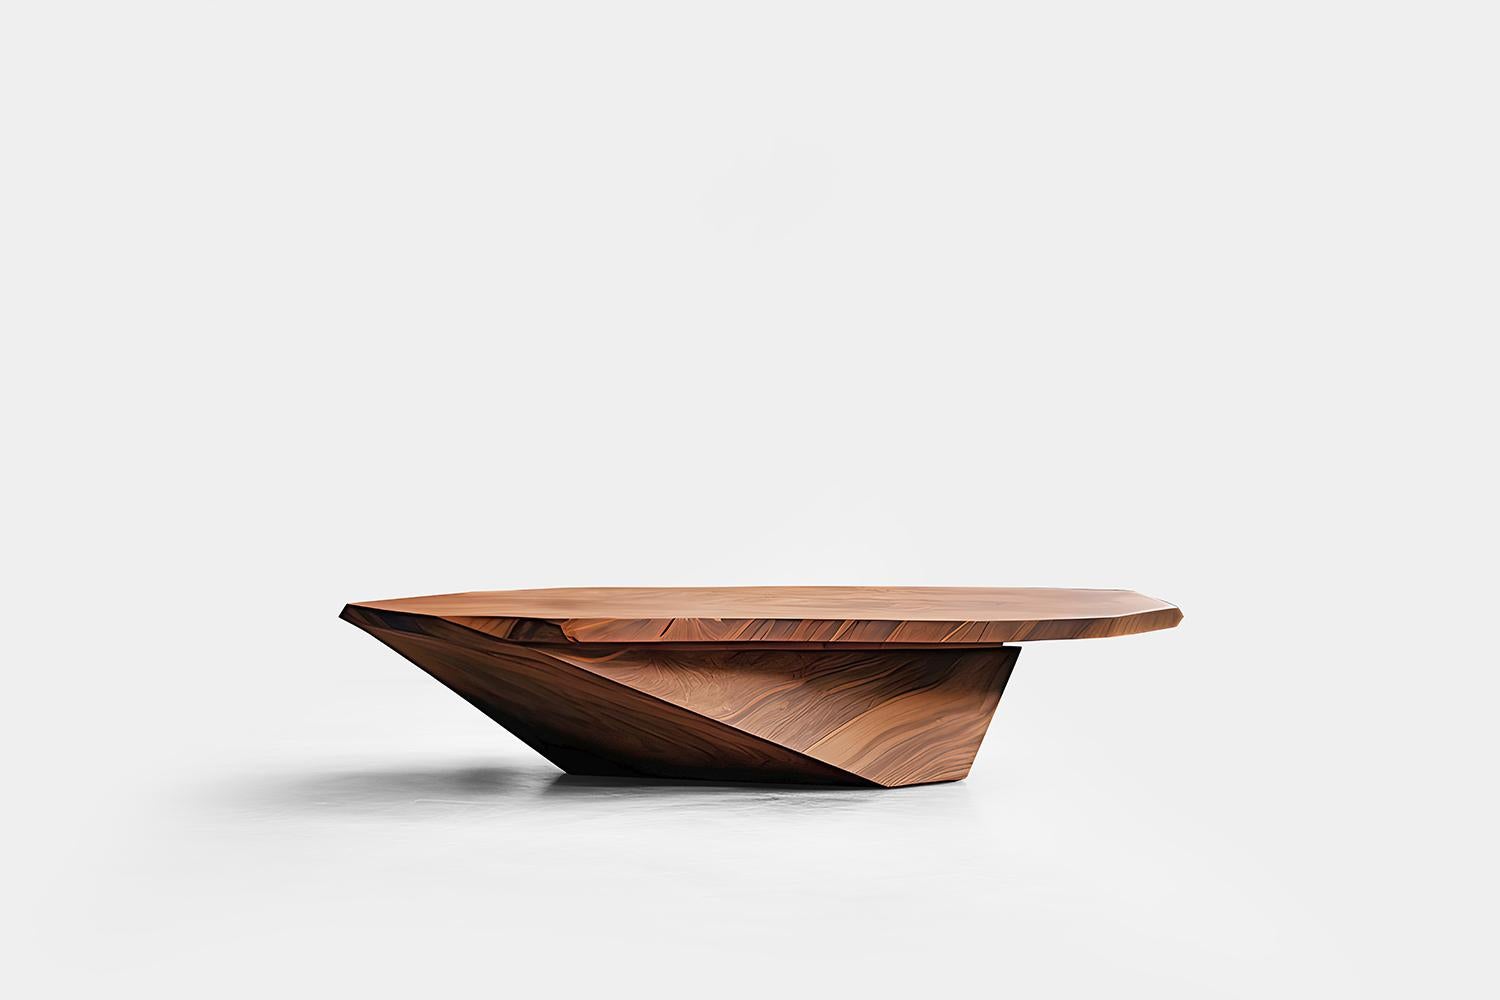 Mexican Sculptural Coffee Table Made of Solid Wood, Center Table Solace S24 by NONO For Sale